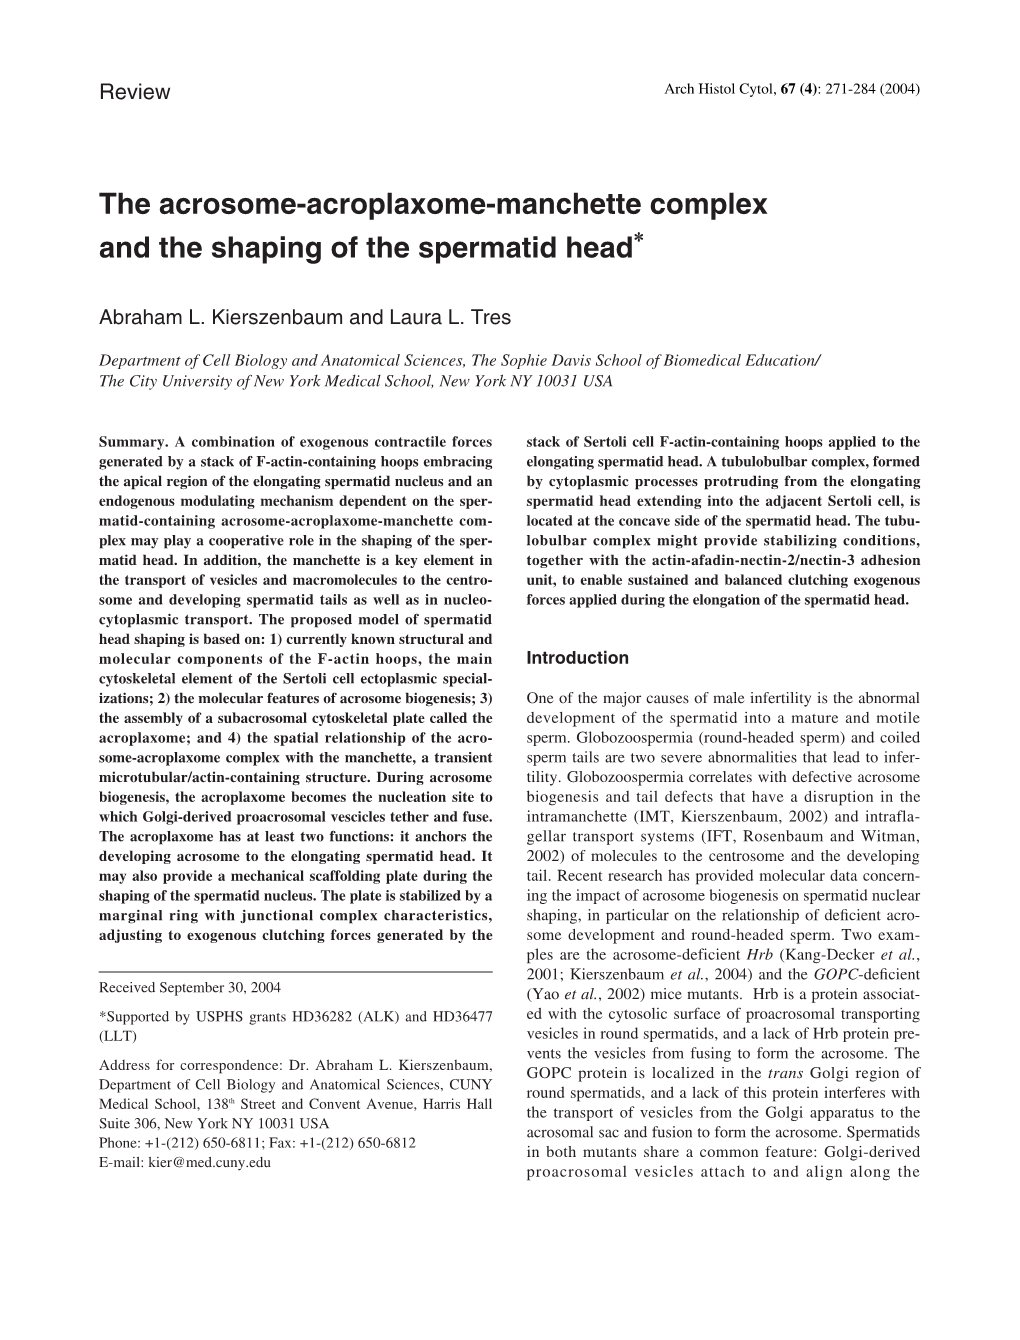 The Acrosome-Acroplaxome-Manchette Complex and the Shaping of the Spermatid Head*